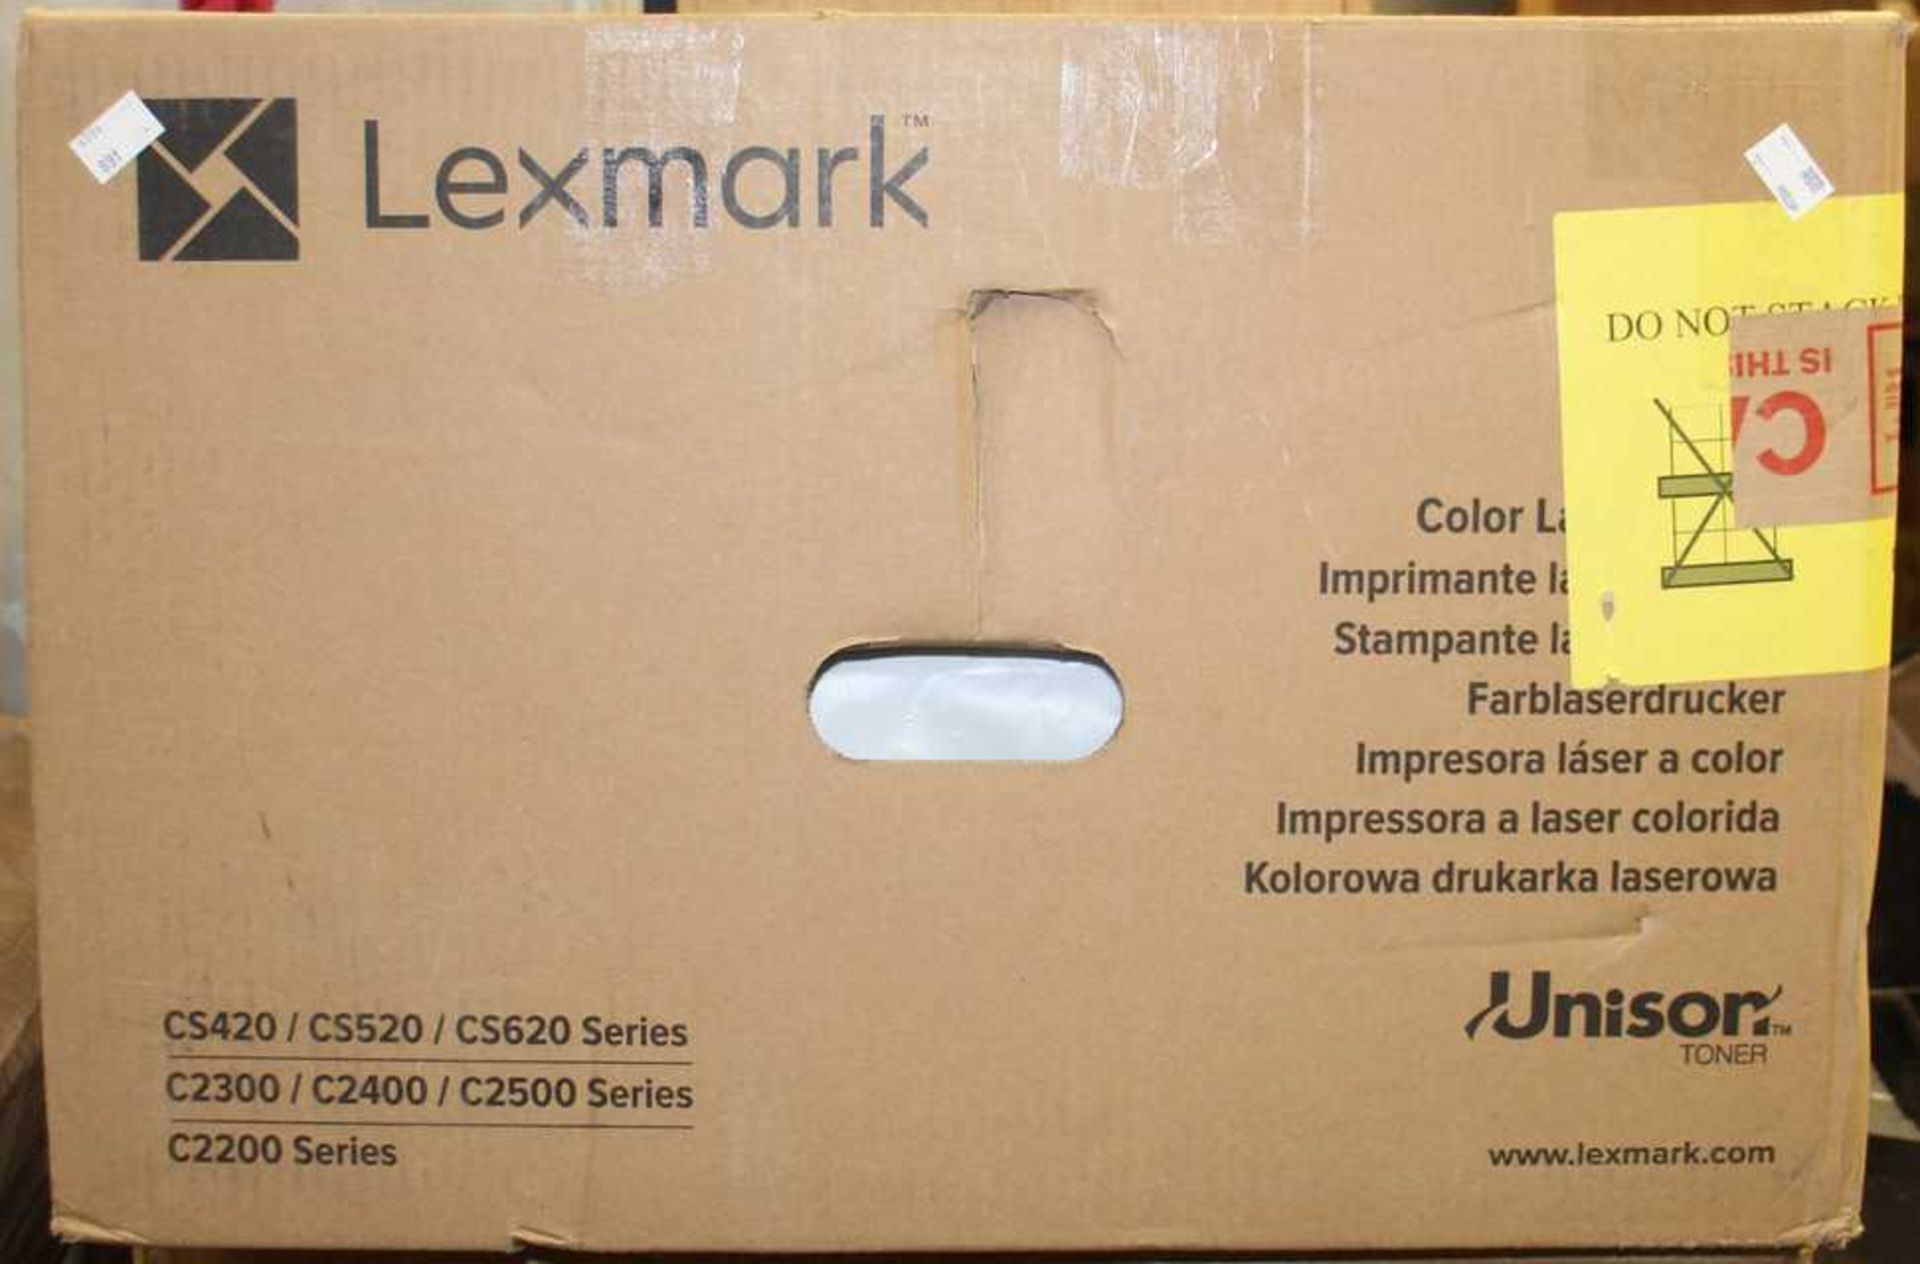 COLLECTION ONLY: A boxed as new Lexmark C2535dw A4 Colour Laser Printer (M/N: 42CC173) (Box